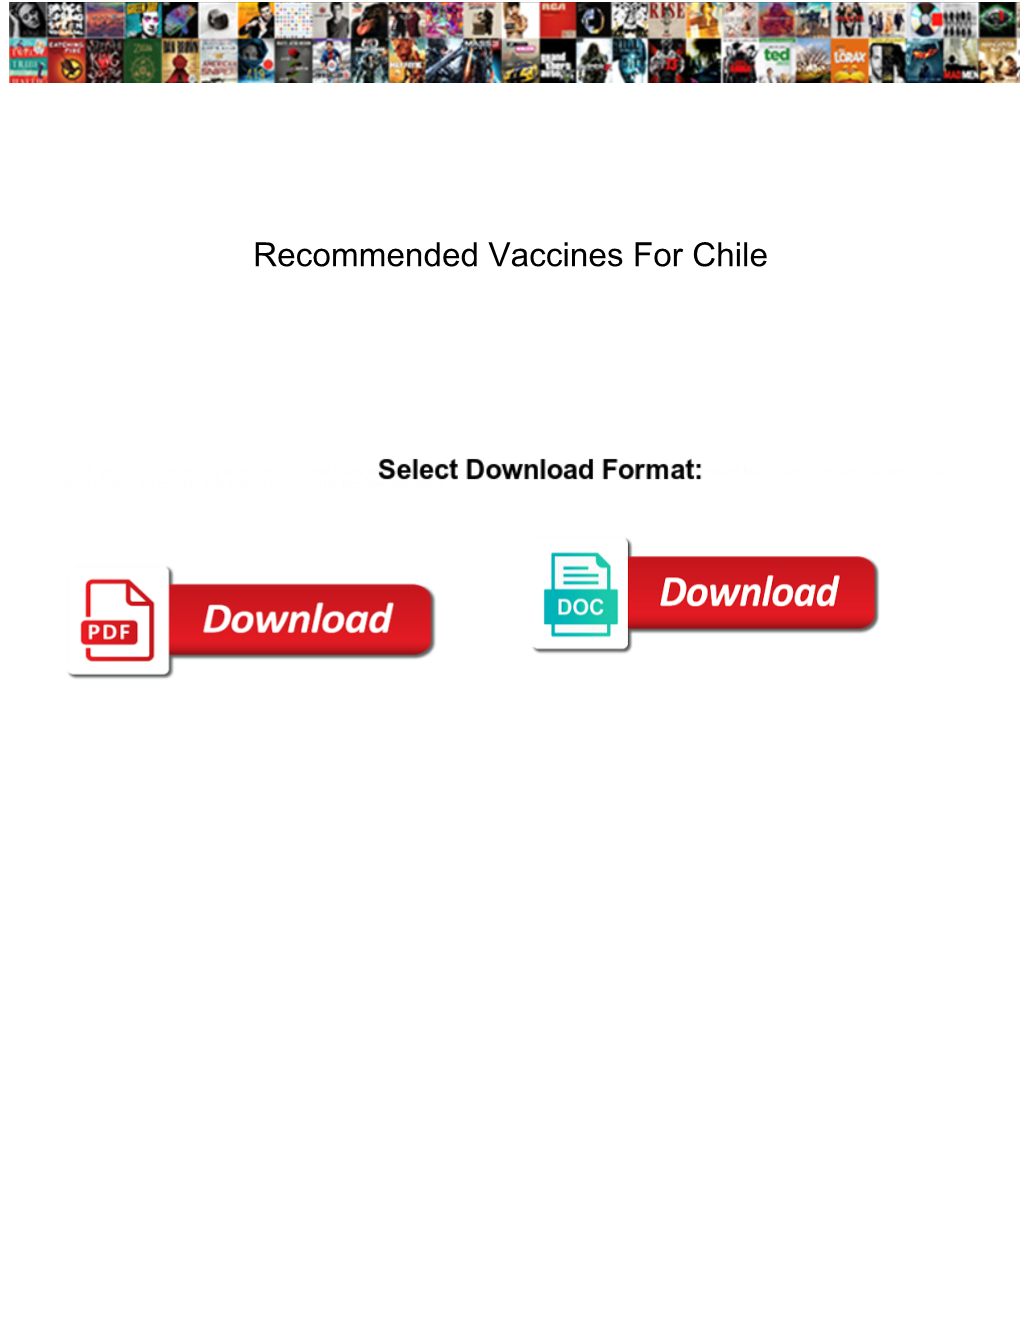 Recommended Vaccines for Chile